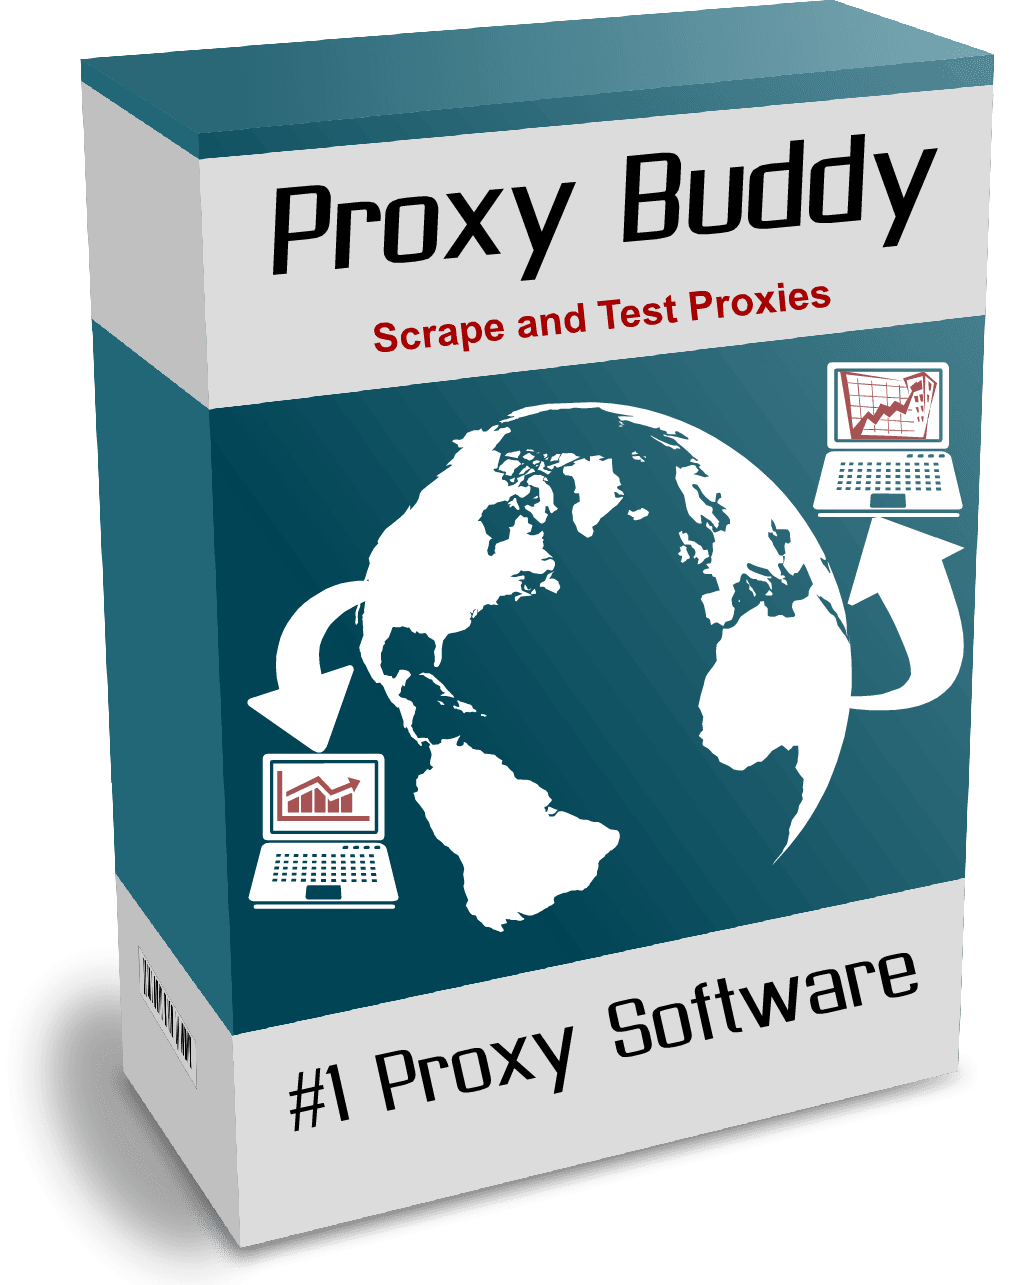 Proxy Buddy better than ever before!